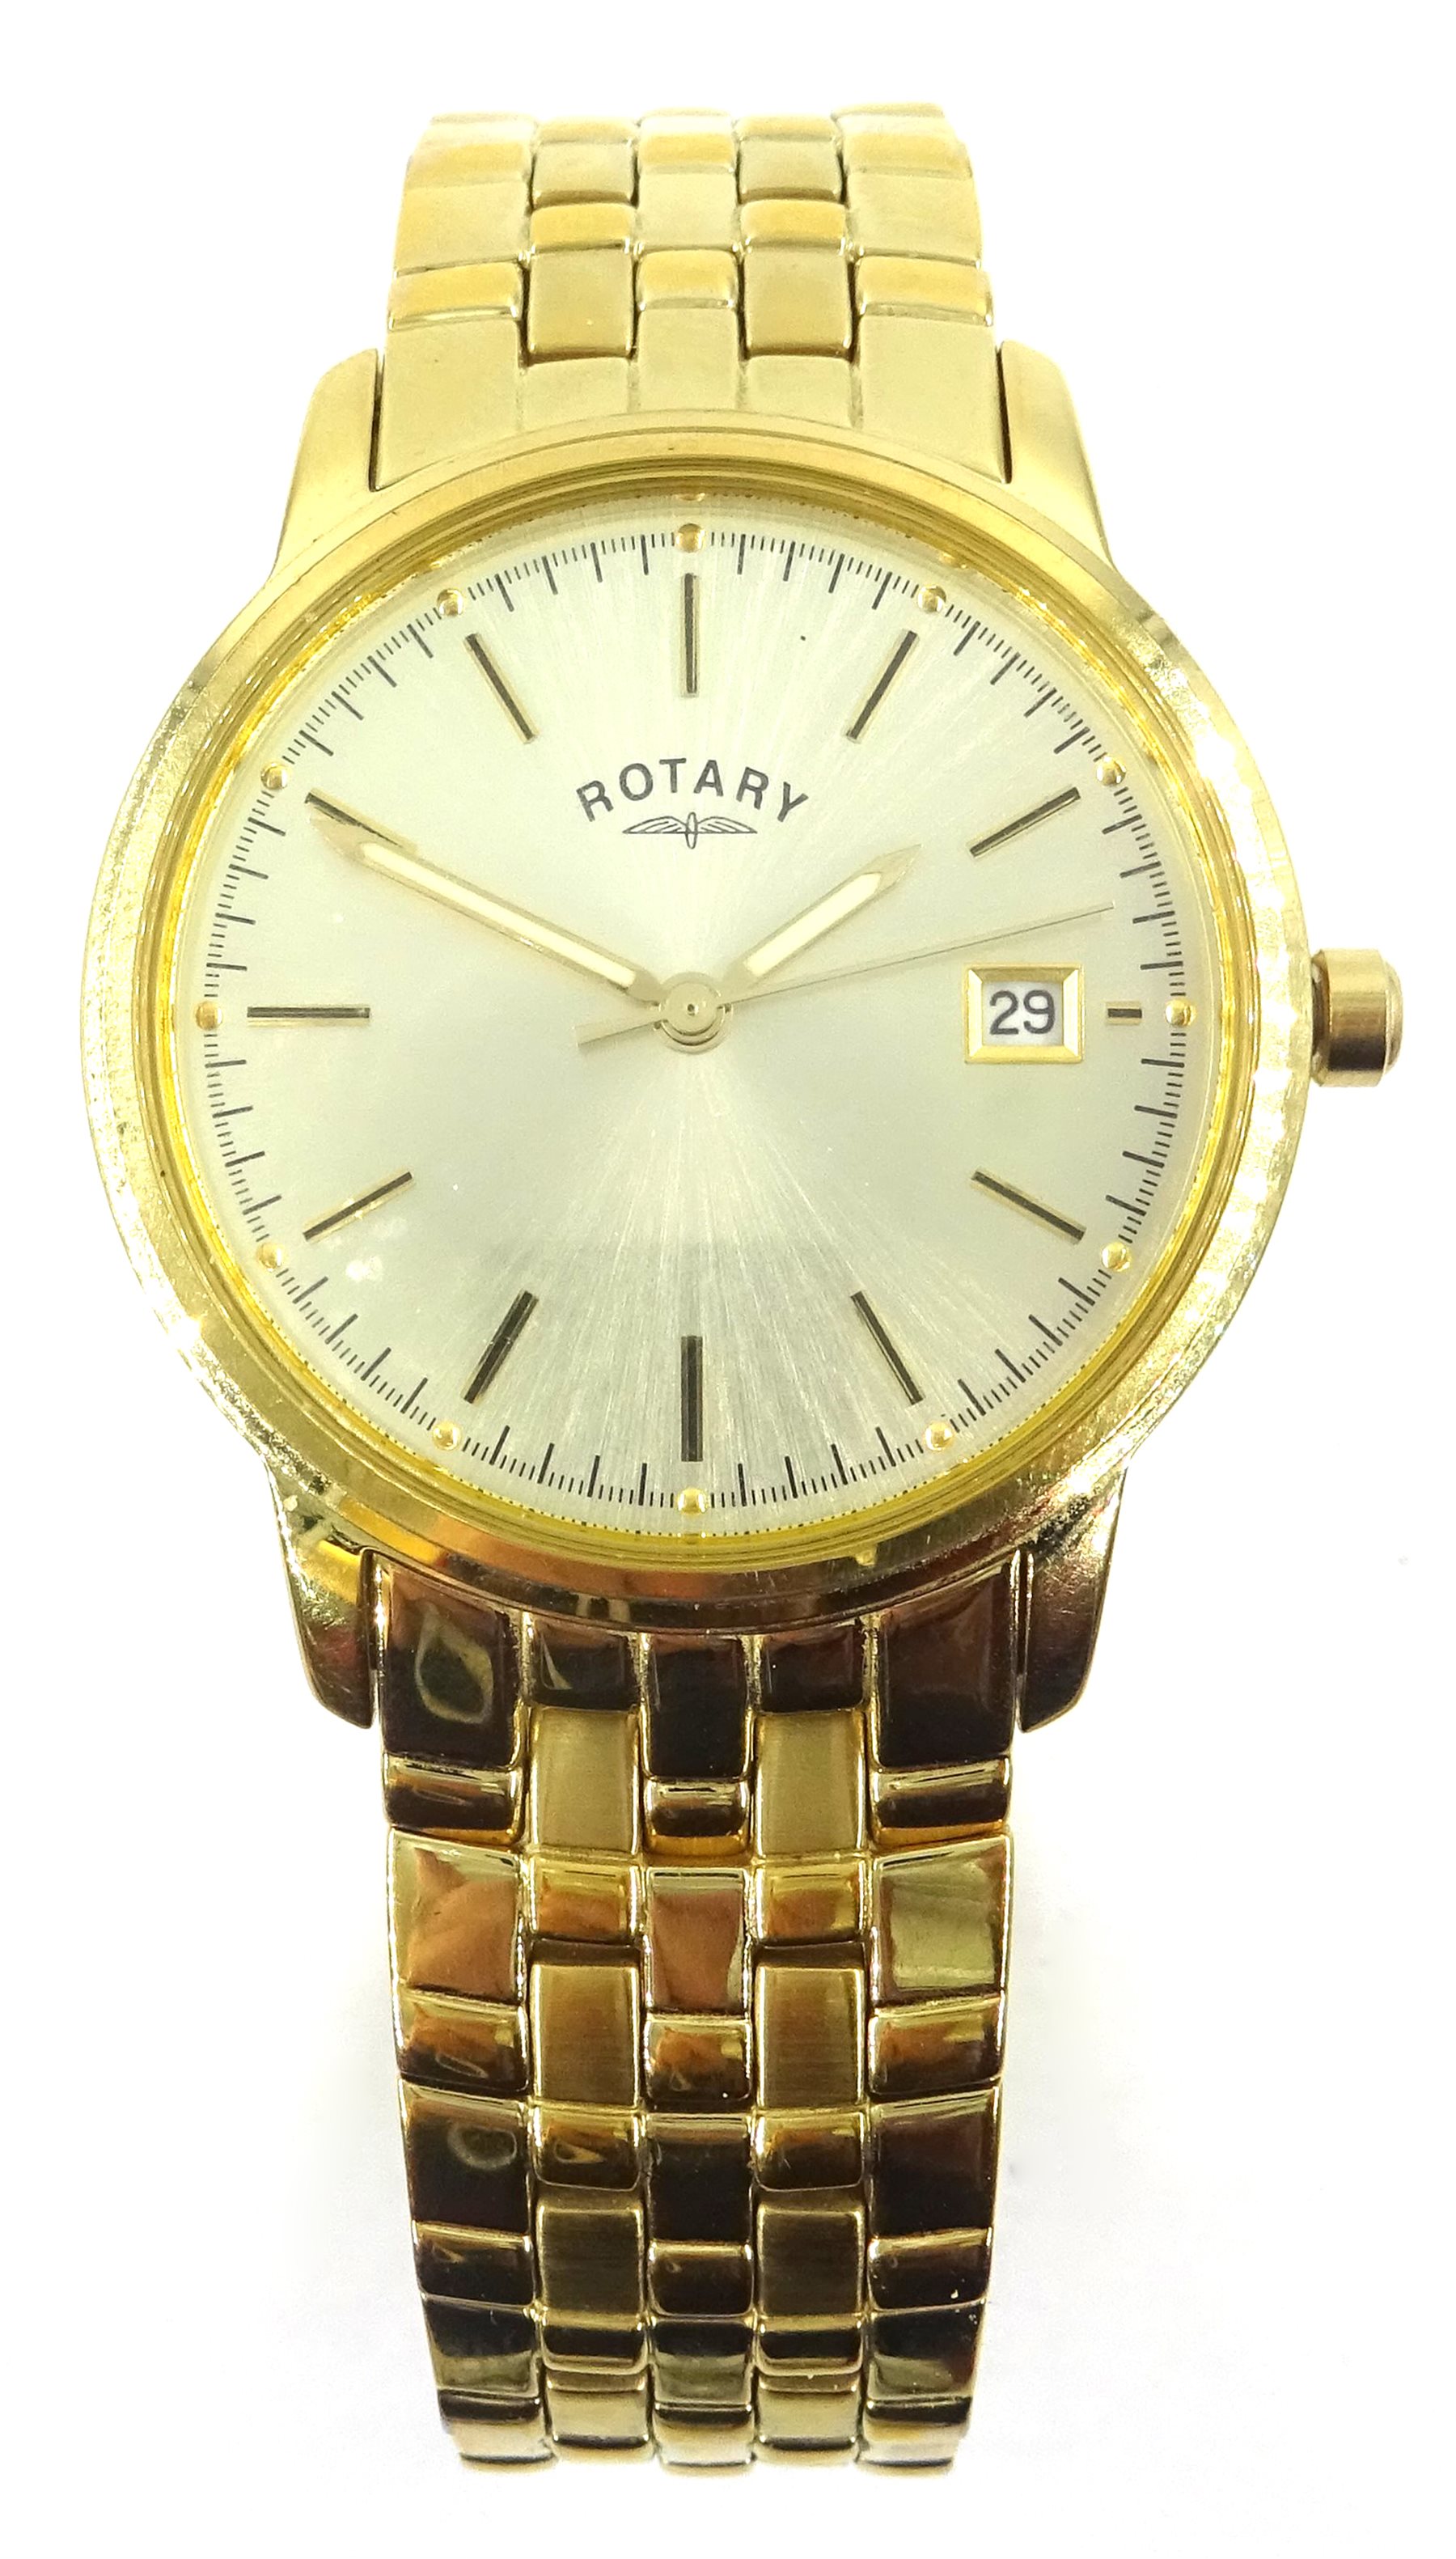 Colection of wristwatches - 9ct gold Everite Incabloc, Globestar ...